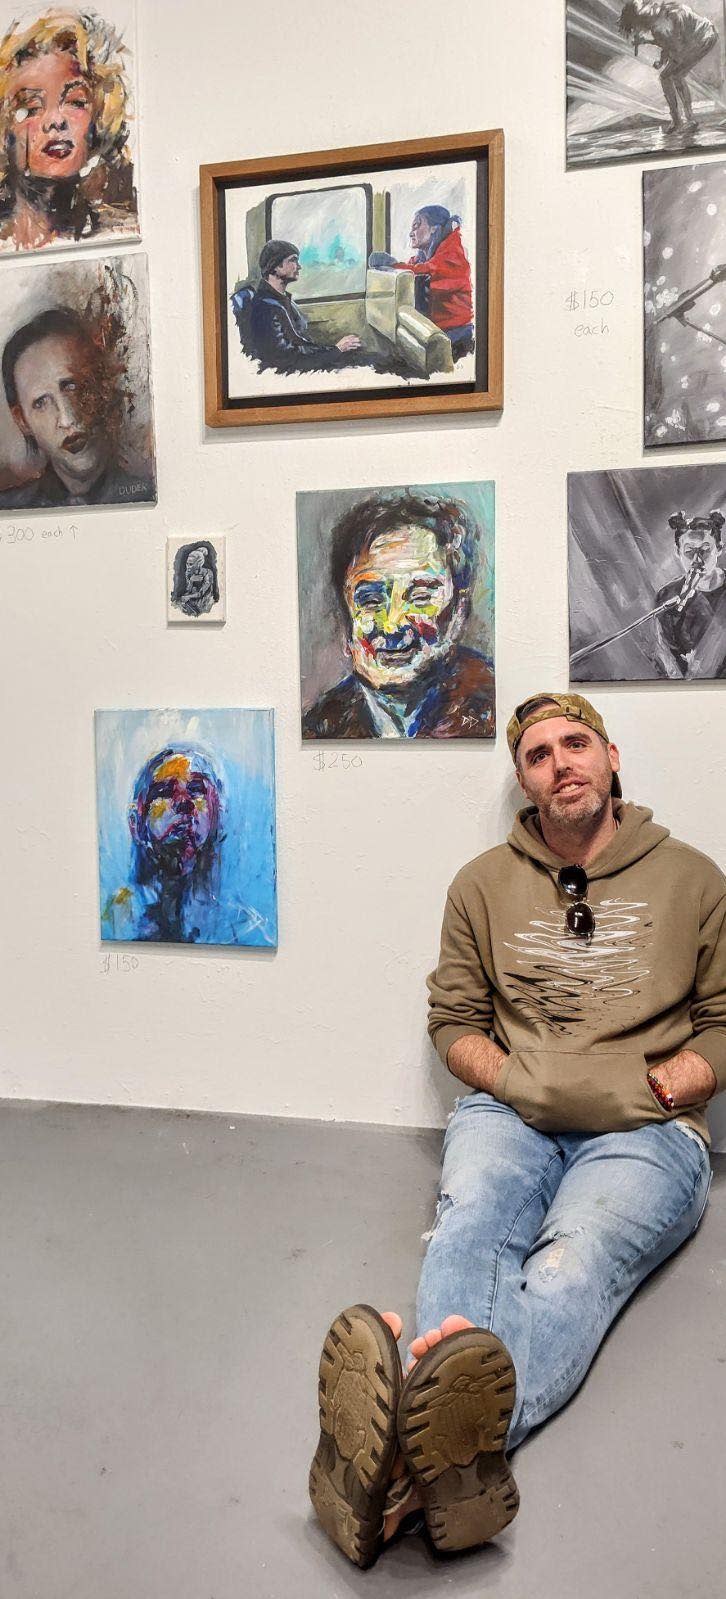 The artwork of Drew Dudek will be featured at his solo show 5-10 p.m. on April 5 at The Hub Art Factory in downtown Canton during First Friday.